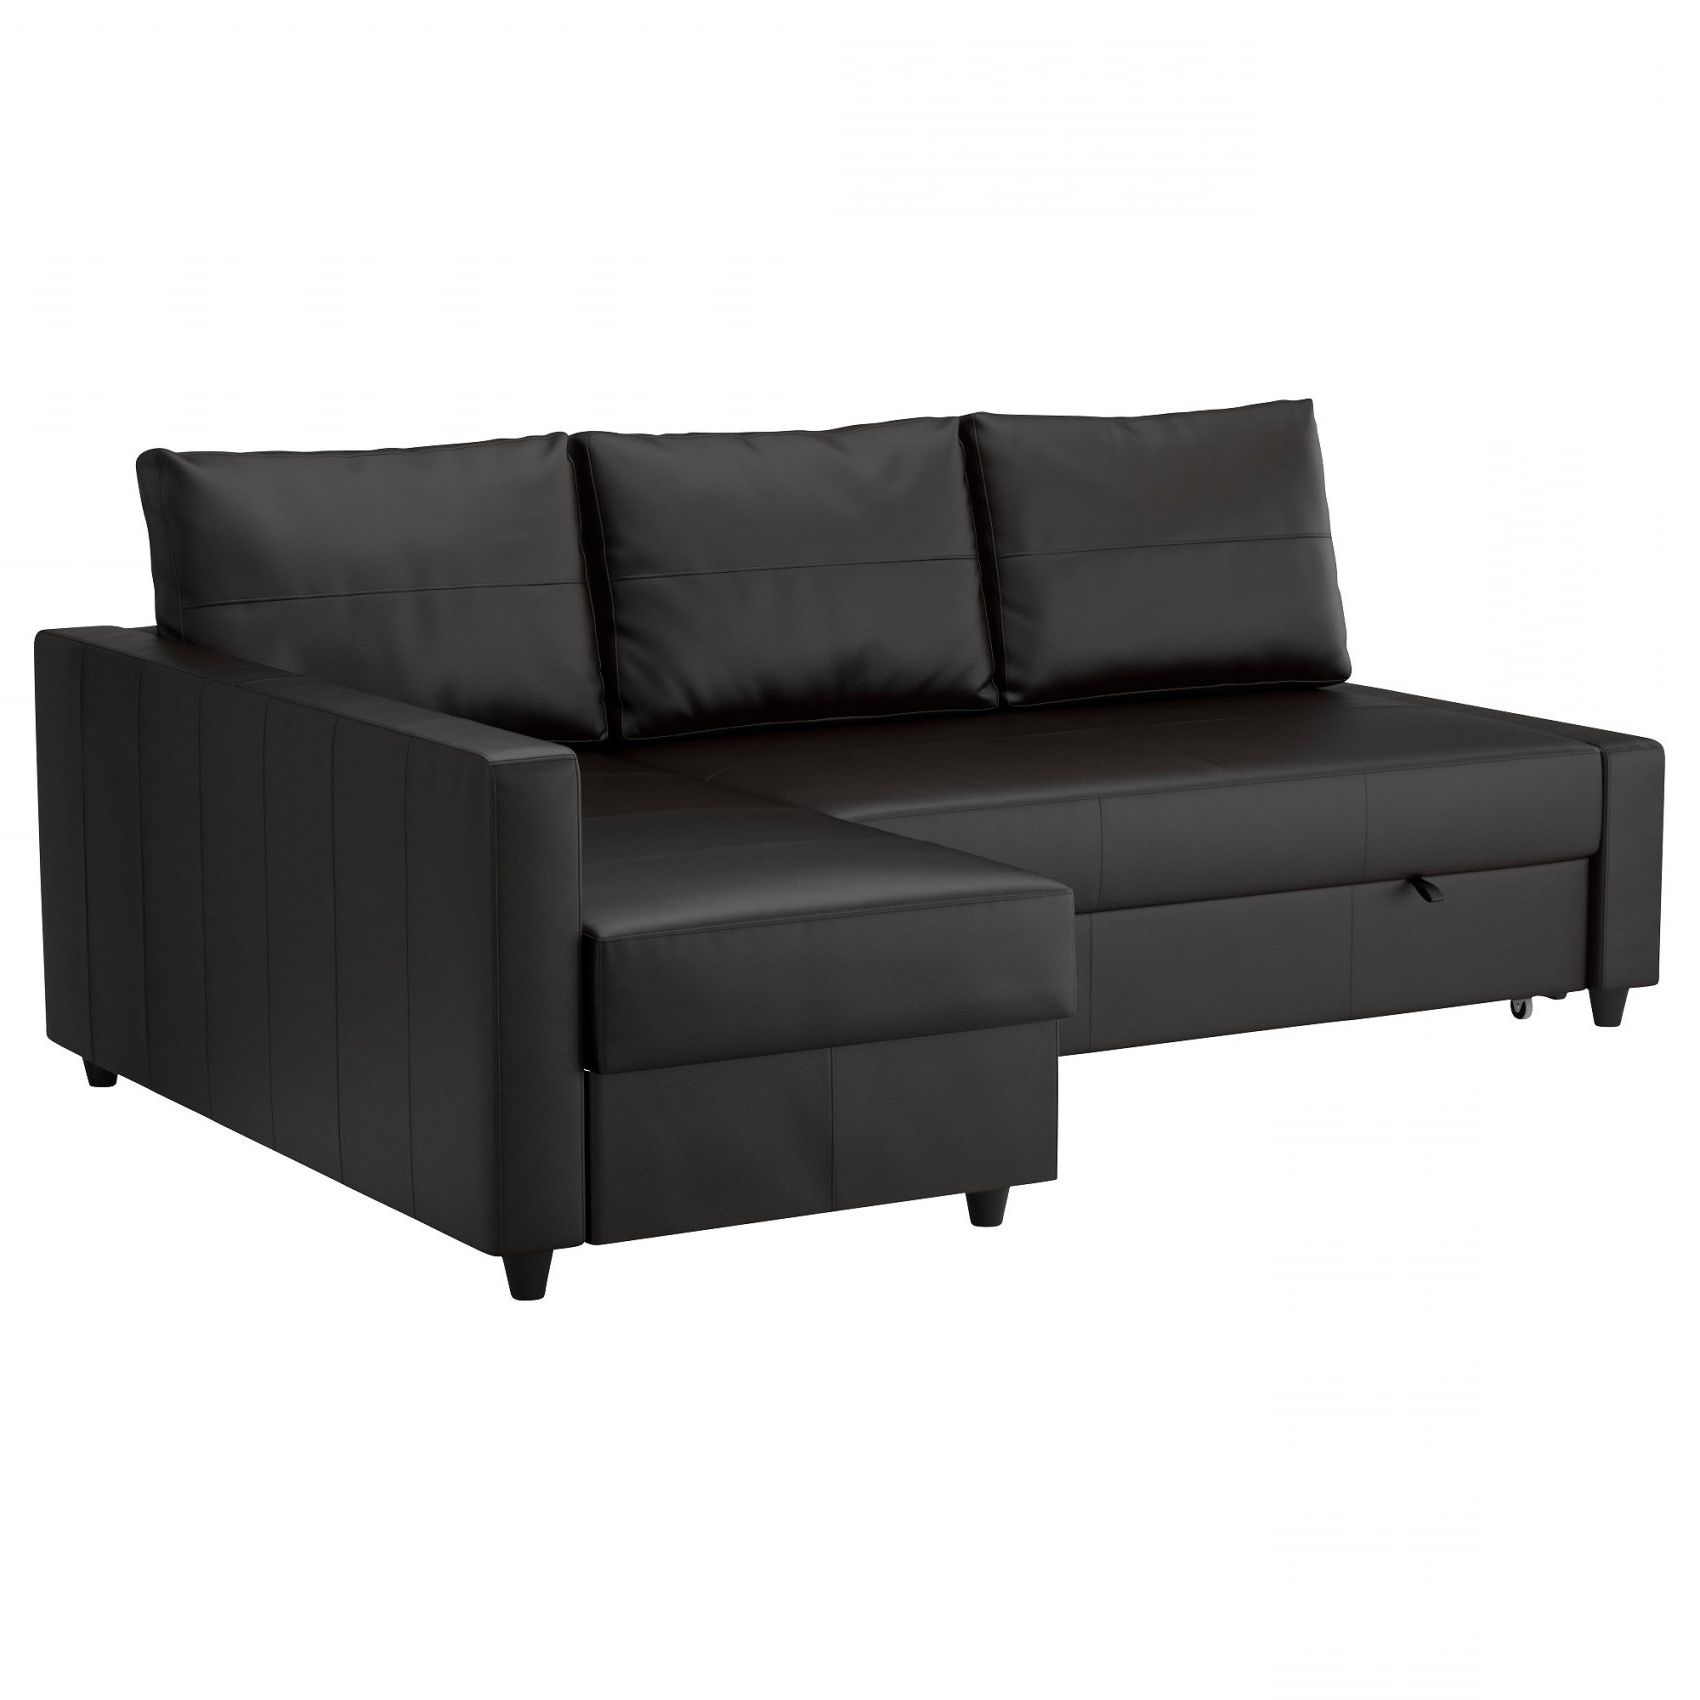 Well Liked Chaise Lounge Sleeper Sofas Regarding Chaise Lounge Sofa Sleeper (Photo 5 of 15)